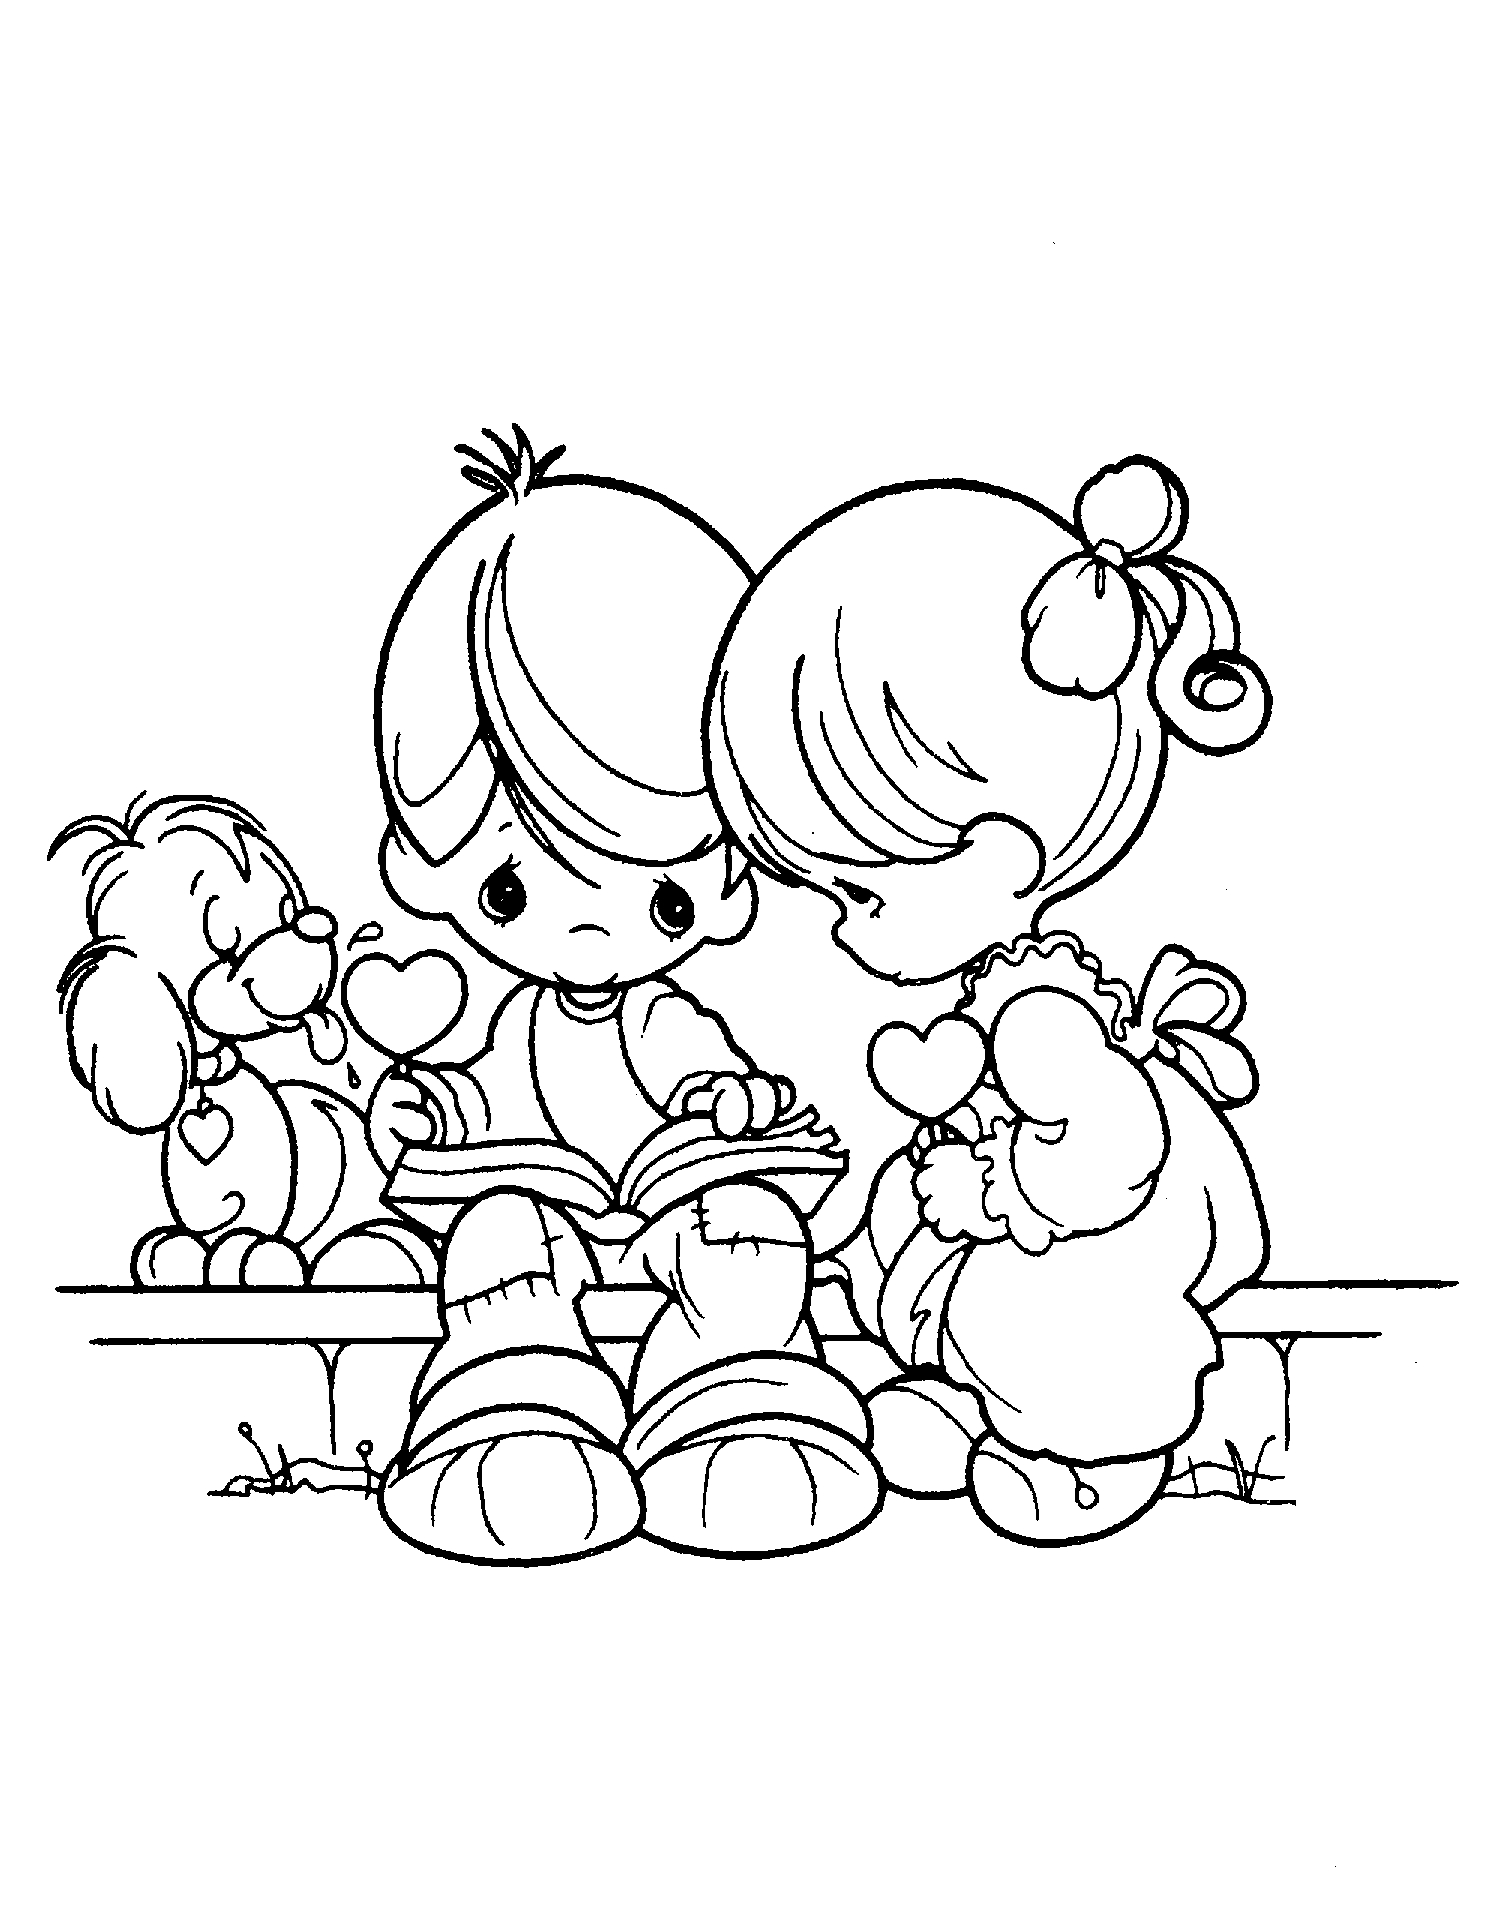 Precious Moments Baby Coloring Pages Coloring Pages Freeble Precious Moments Coloring Pages For Kids